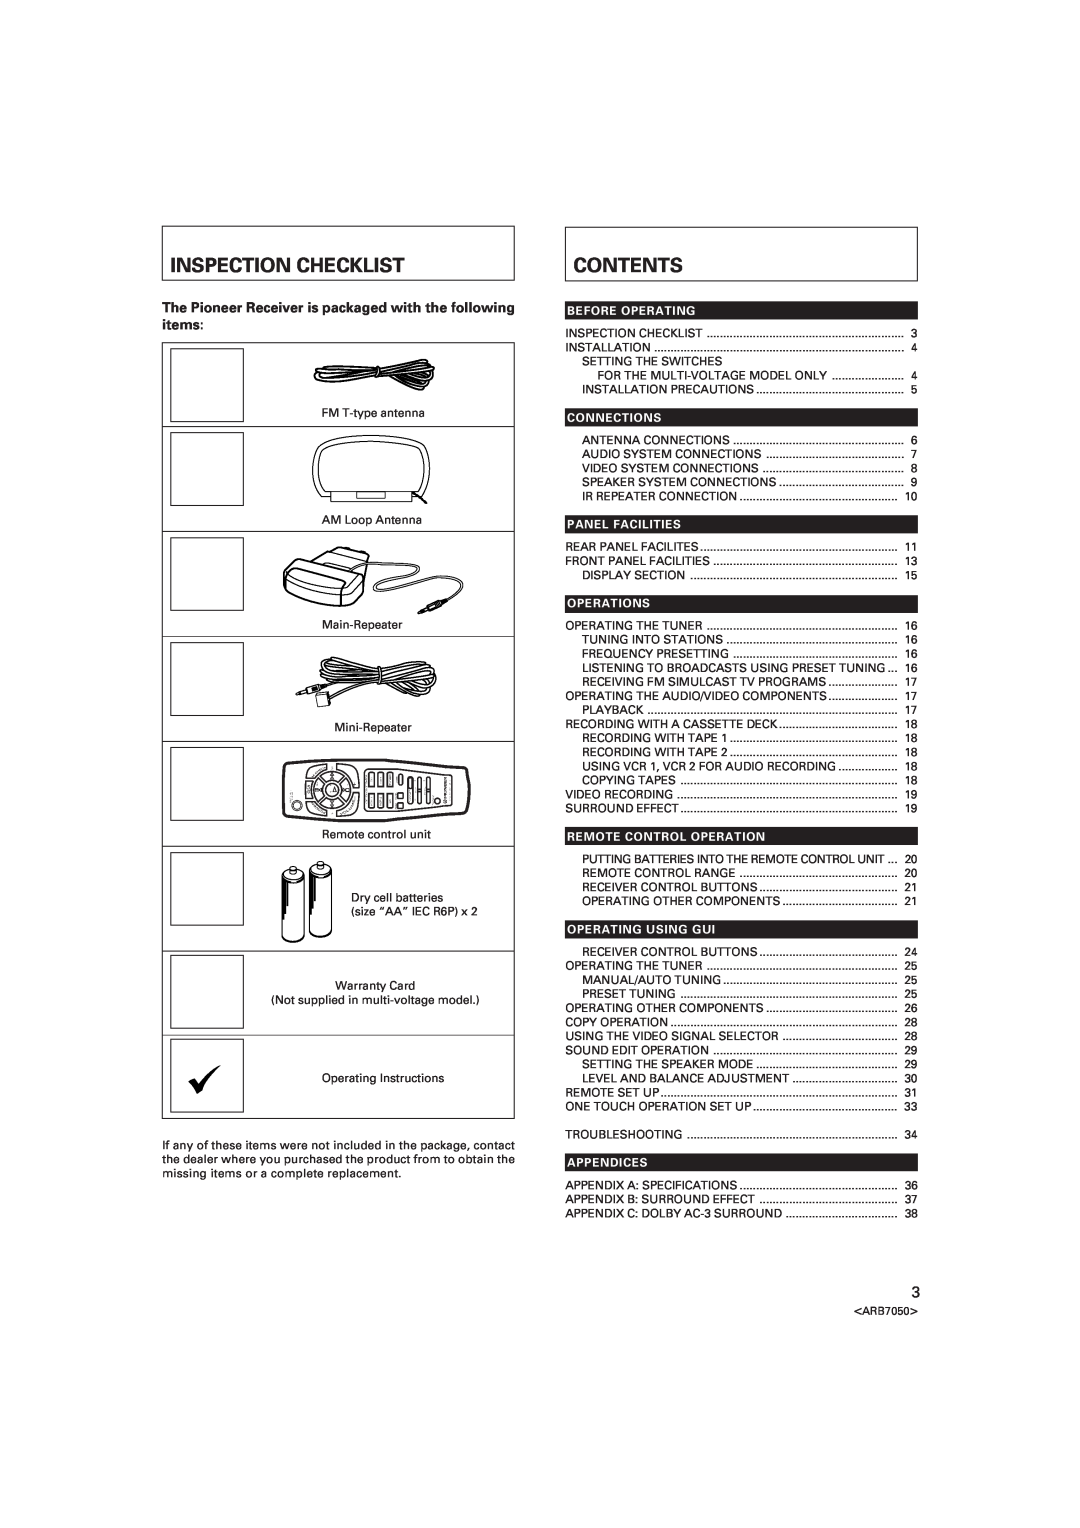 Pioneer VSX-D3S Inspection Checklist, Contents, Before Operating, Connections, Panel Facilities, Operations, Appendices 